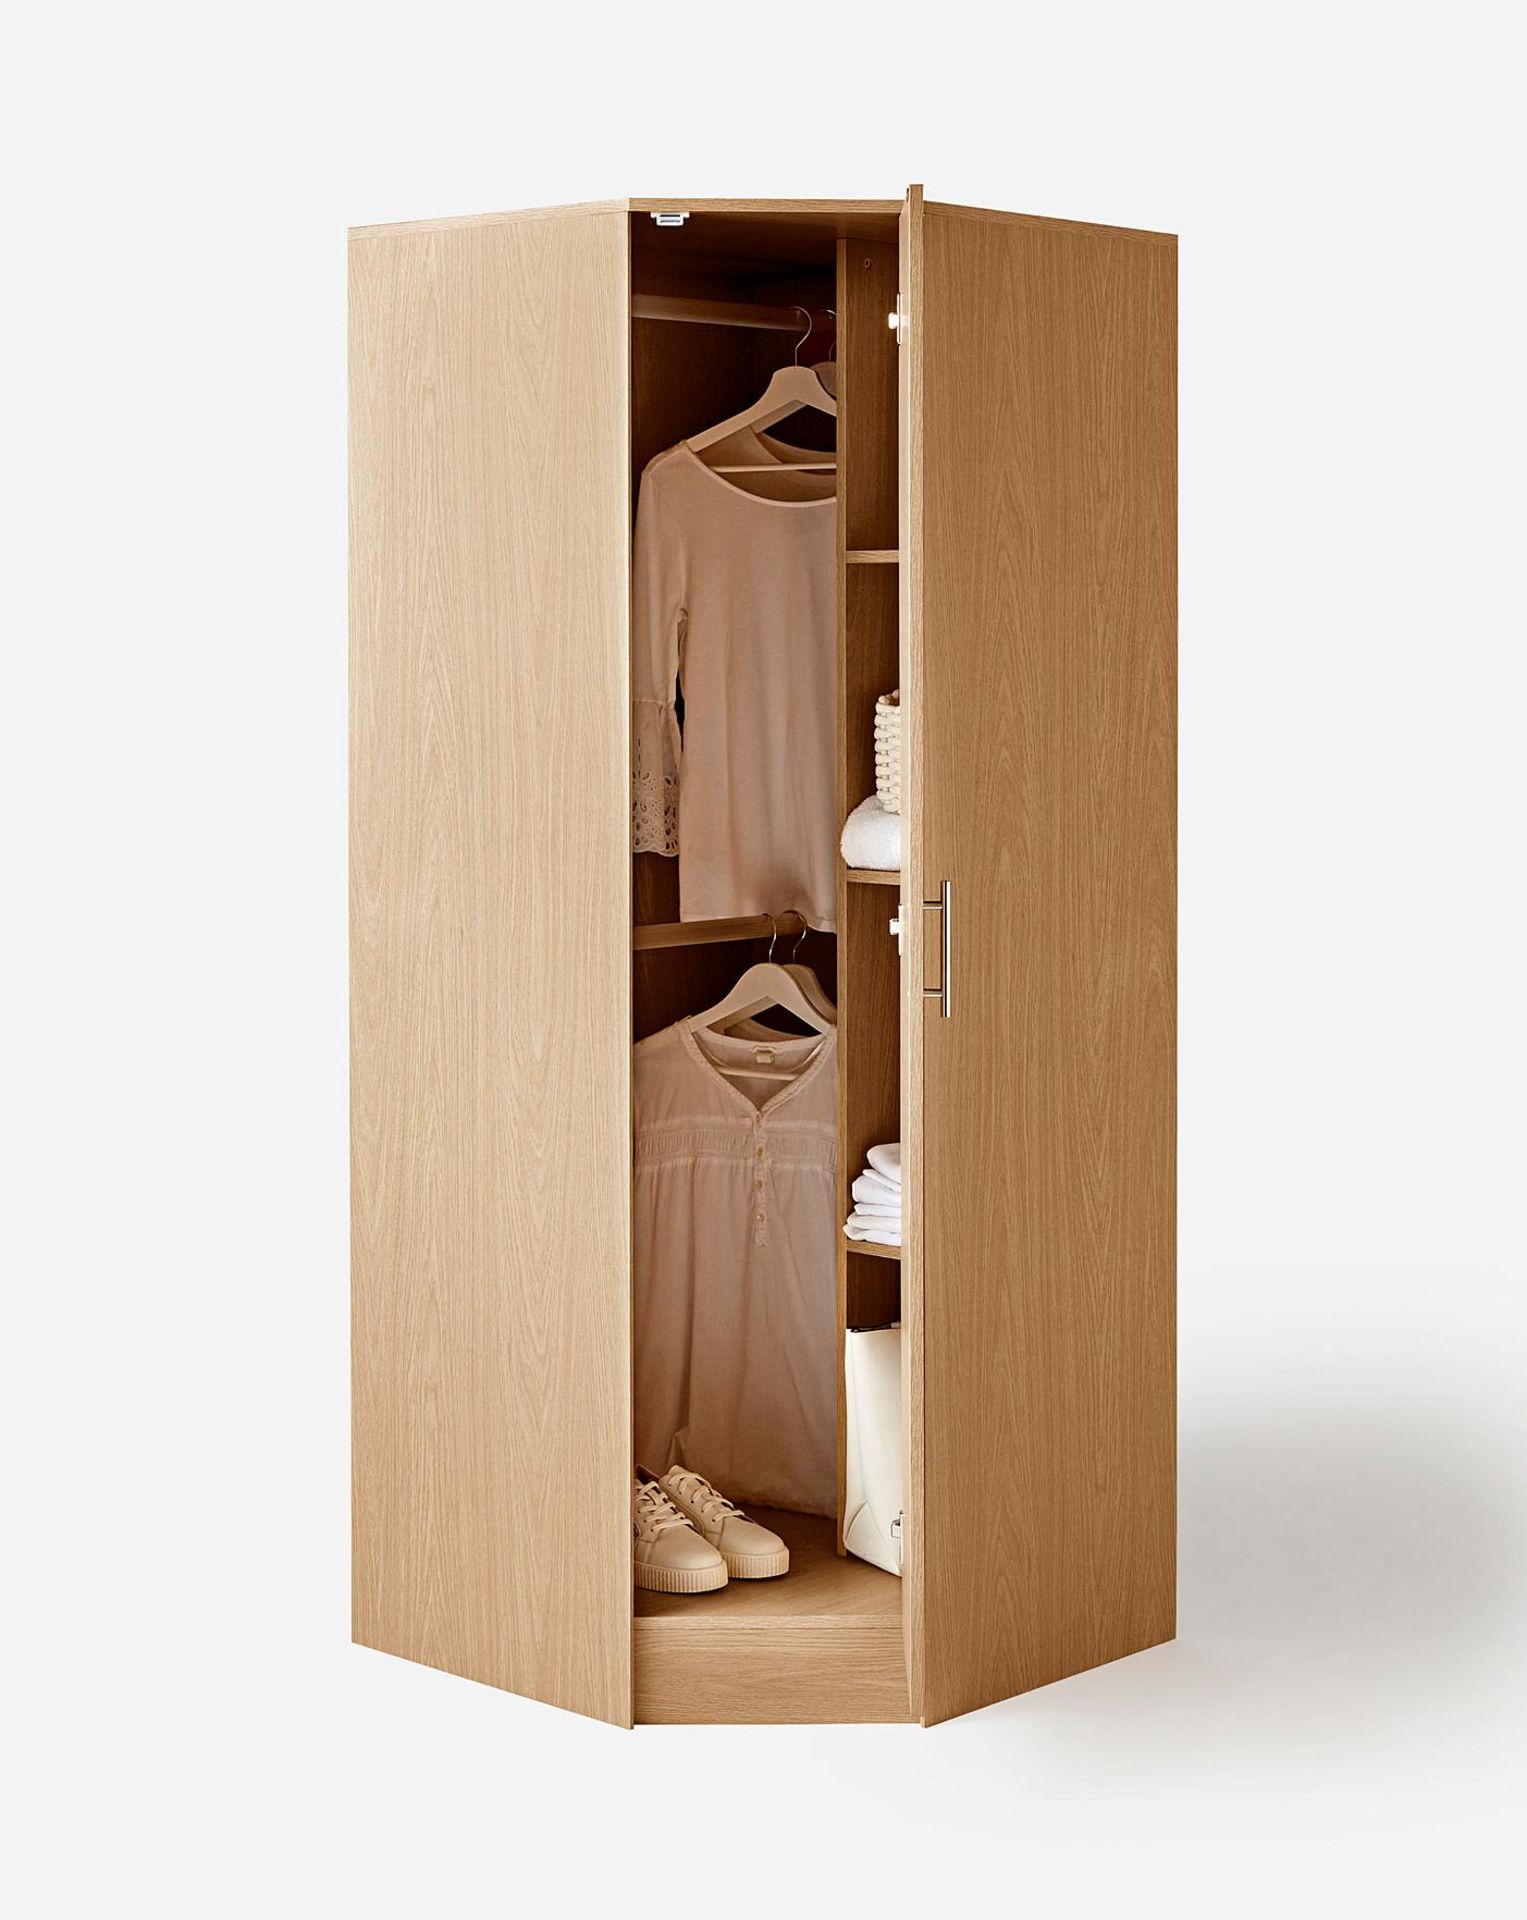 NEW & BOXED DAKOTA Corner Wardrobe. OAK EFFECT. RRP £269 EACH. Part of At Home Collection, the - Image 2 of 4